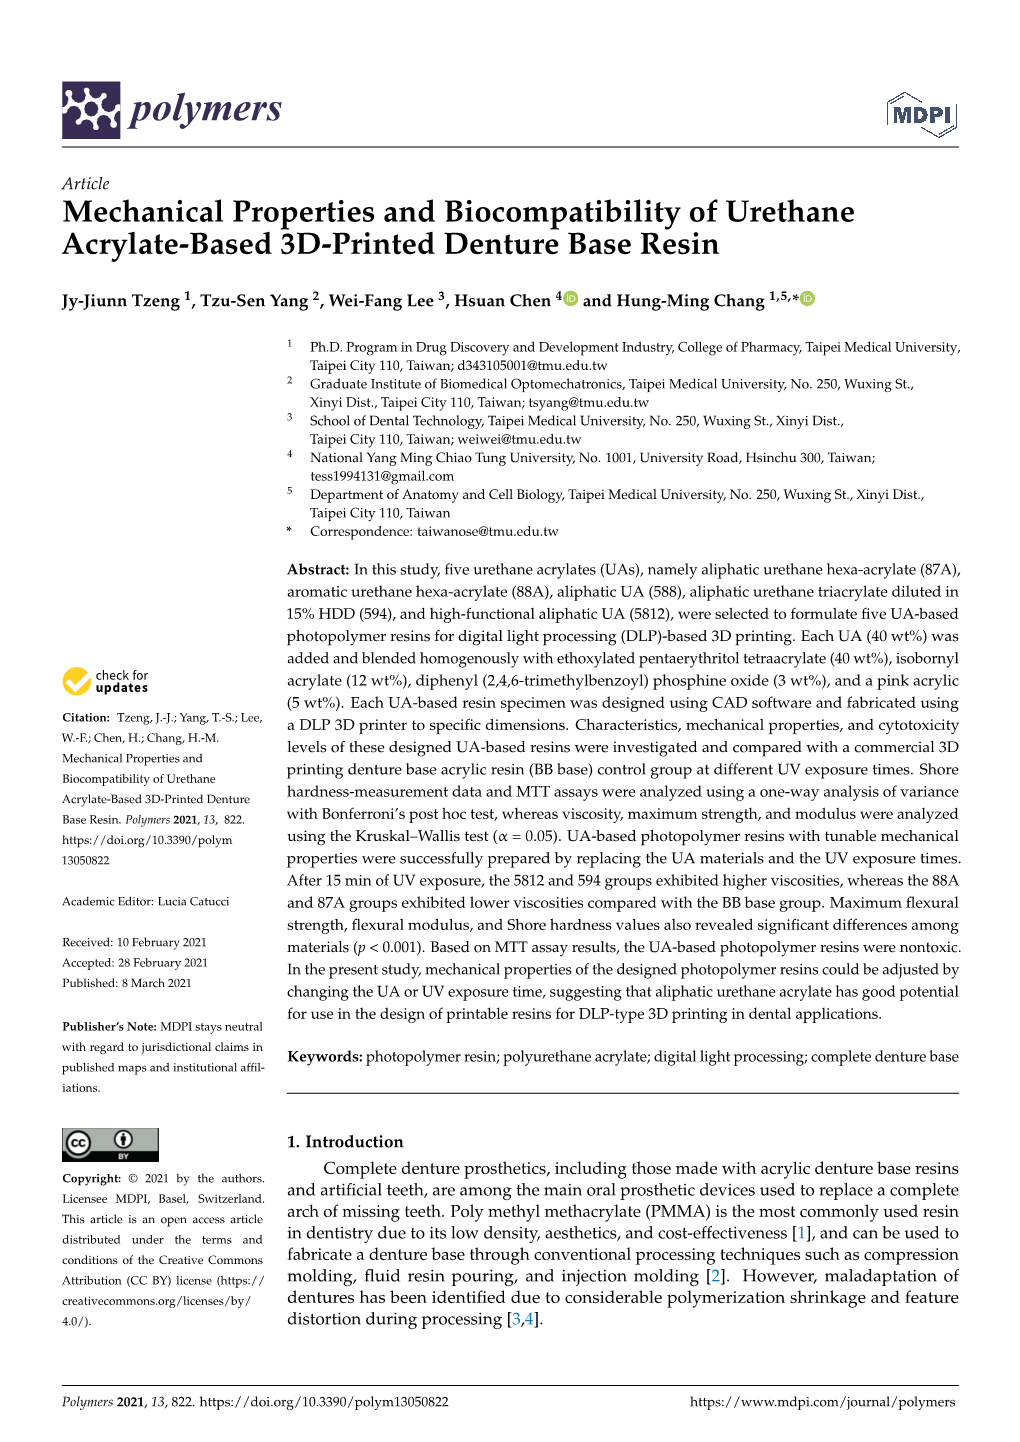 Mechanical Properties and Biocompatibility of Urethane Acrylate-Based 3D-Printed Denture Base Resin